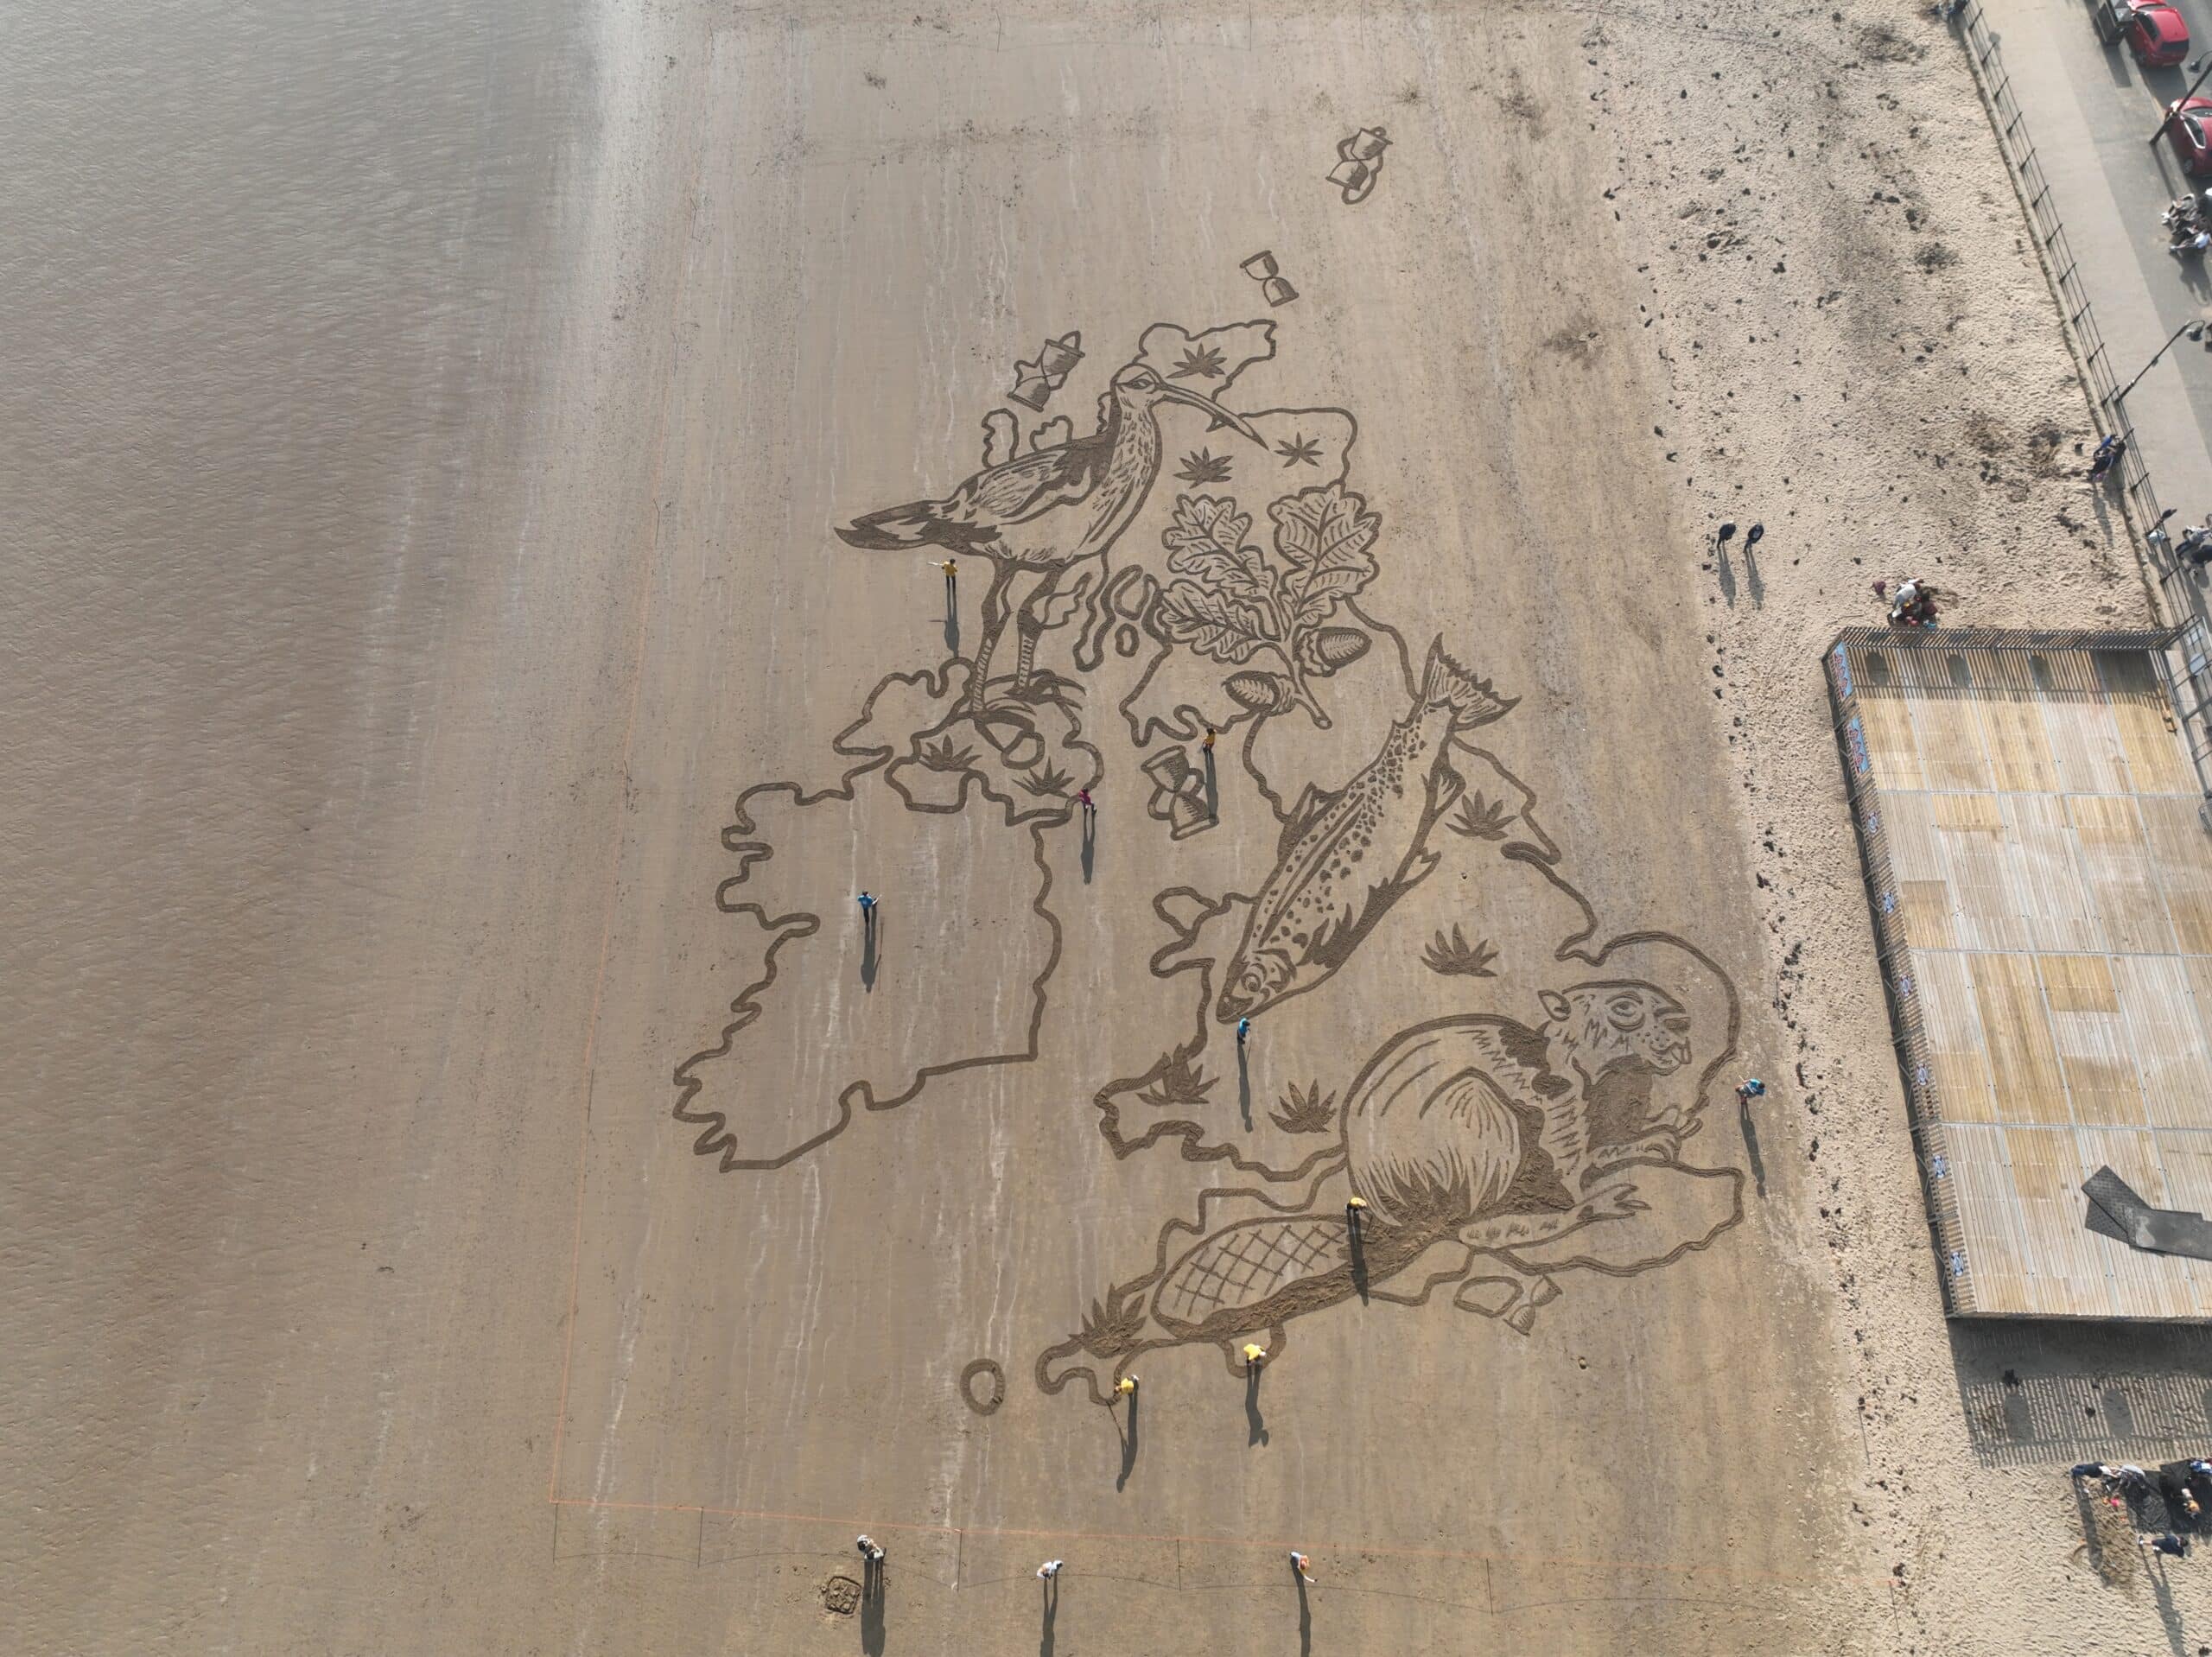 An overhead view of a massive sand artwork depicting the outline of the United Kingdom with an Eurasian beaver, Atlantic salmon, Eurasian curlew and Oak tree across it.